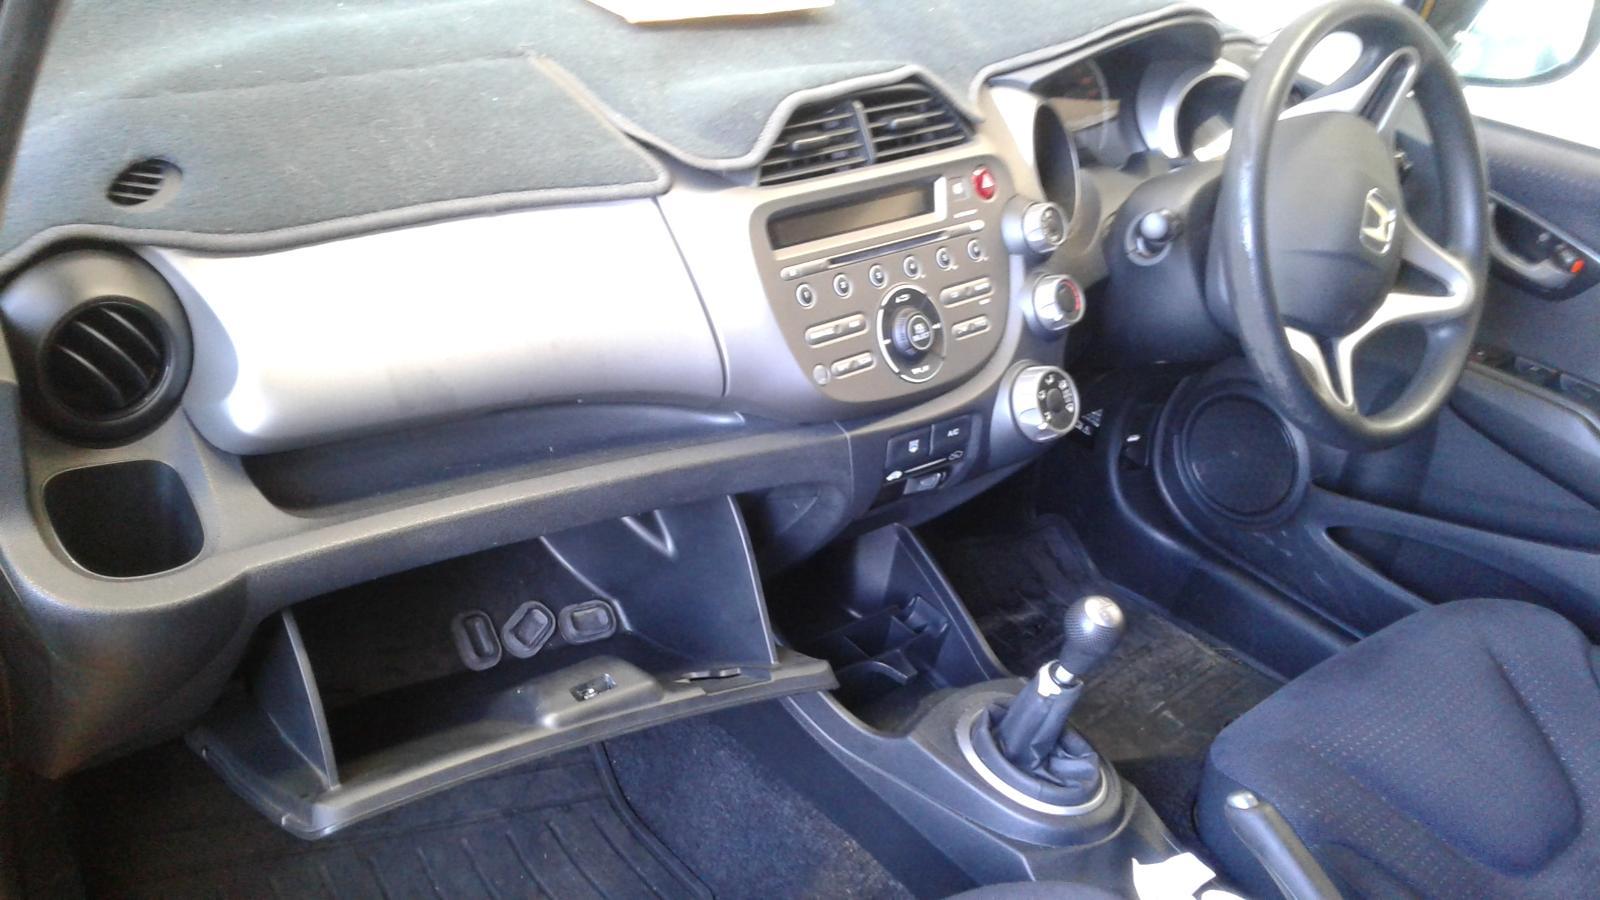 Second Hand Honda Gearboxes